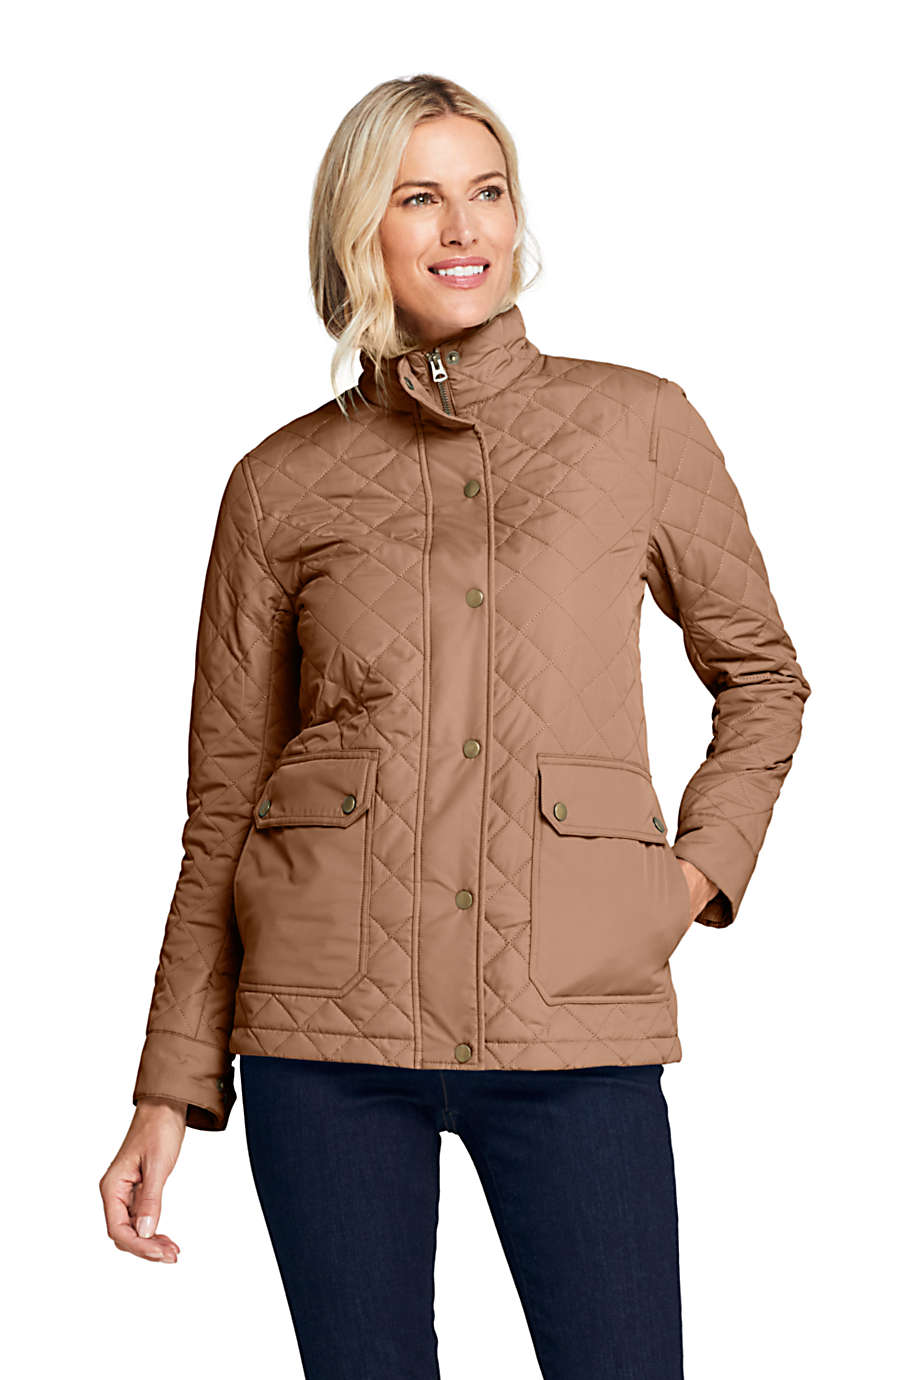 Lands' End Women's Packable Insulated Quilted Barn Long Jacket